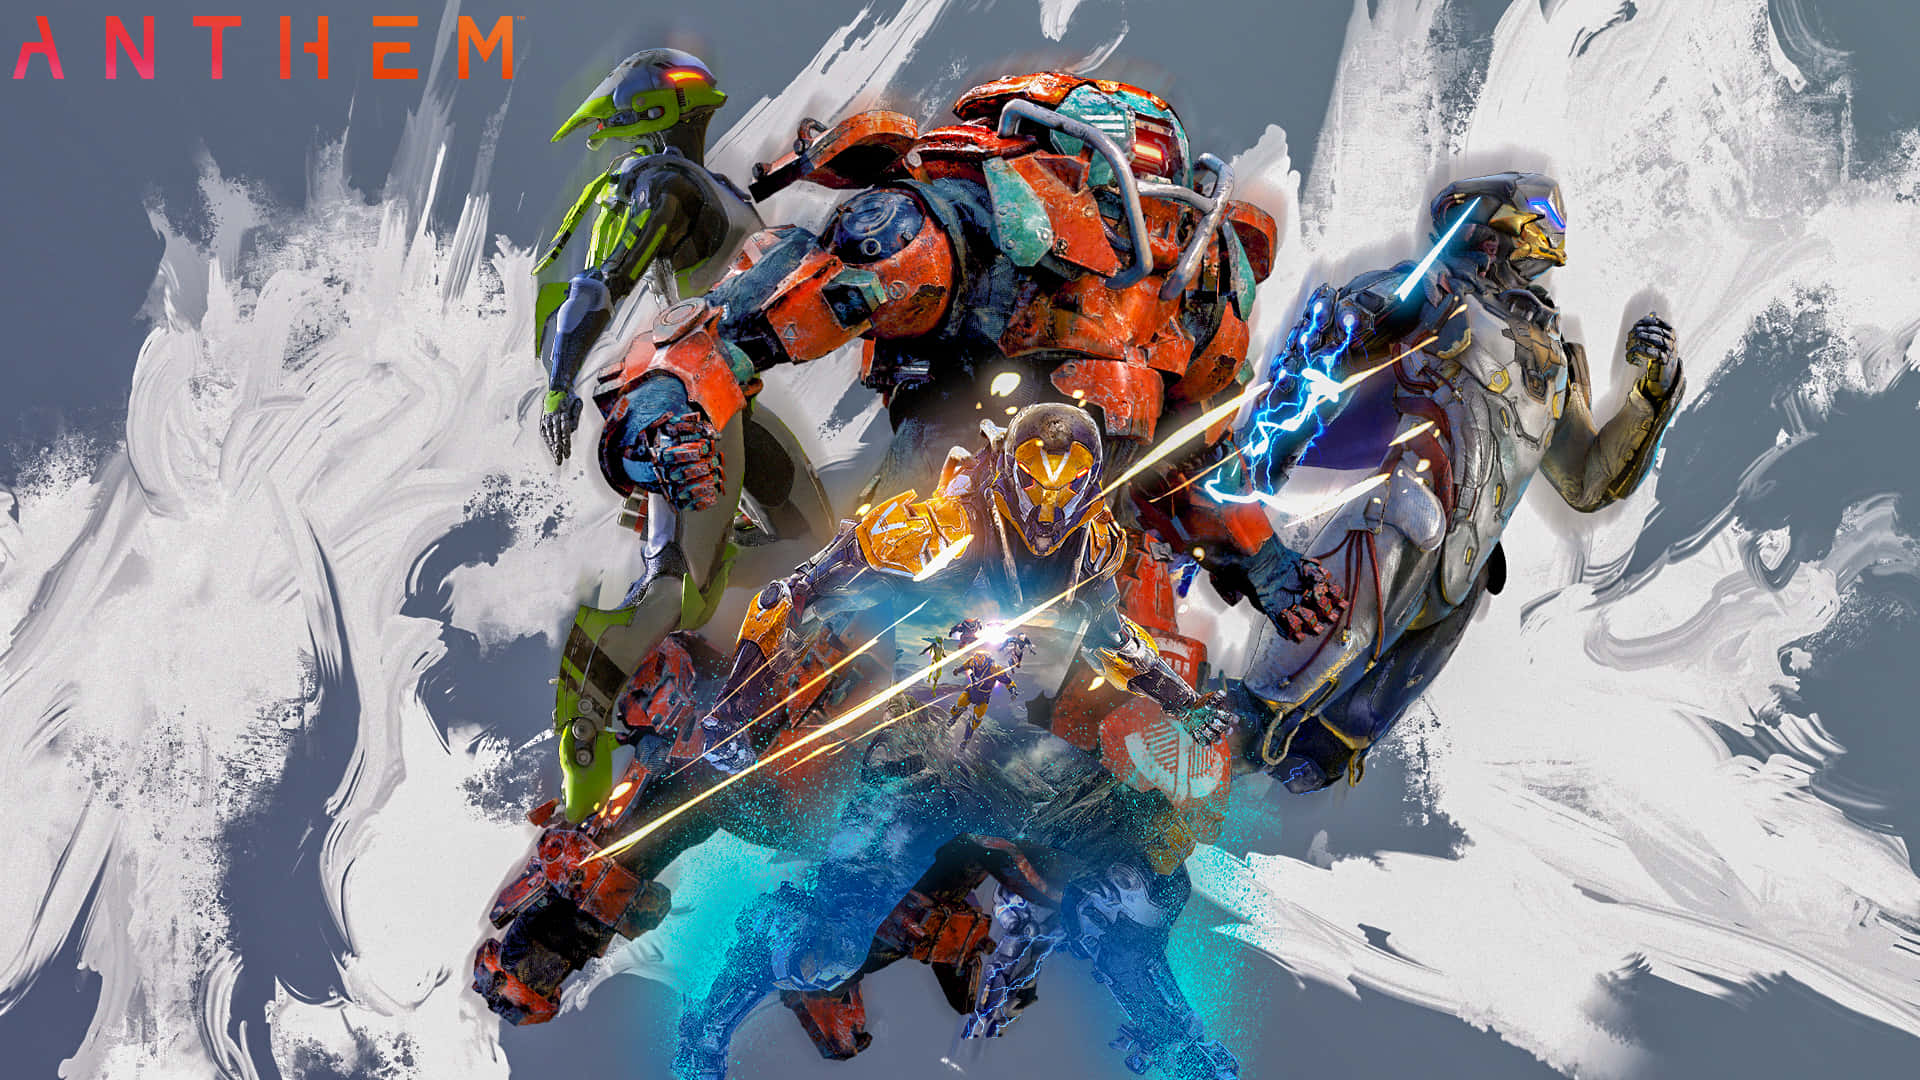 Explore a stunningly beautiful, savagely dangerous world in Anthem. Wallpaper